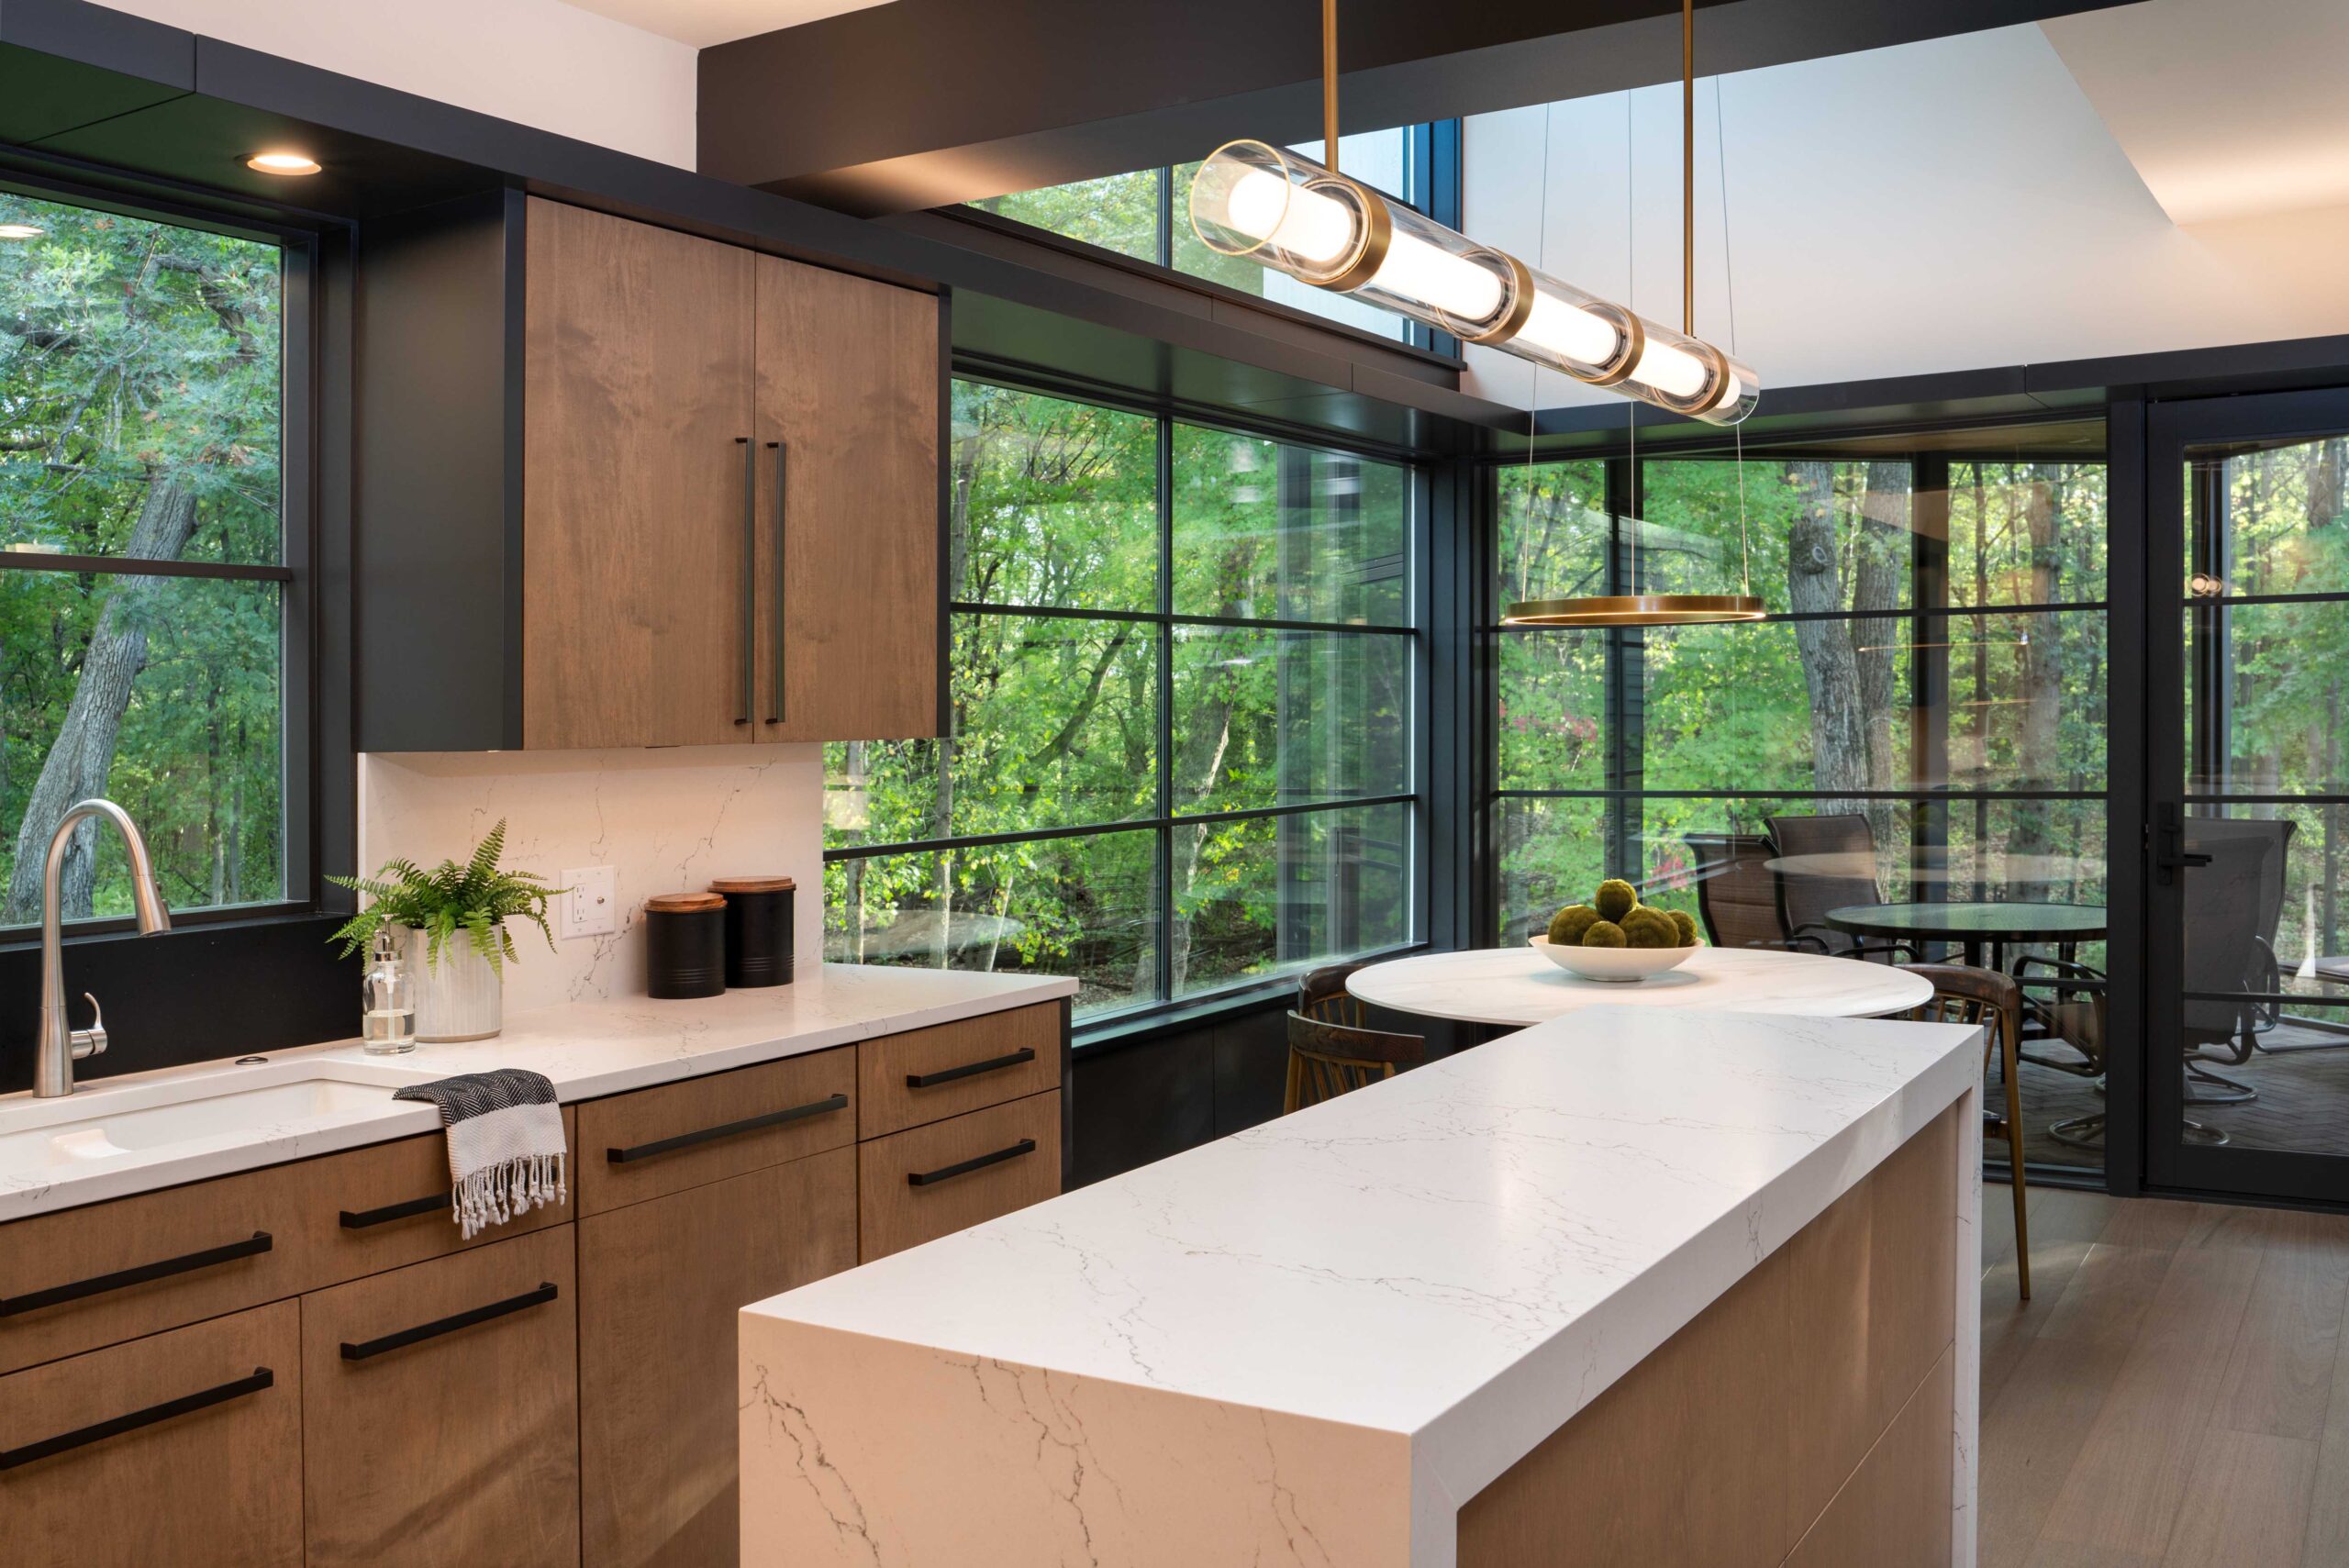 A modern kitchen with a large window overlooking a wooded area in Bloomington.